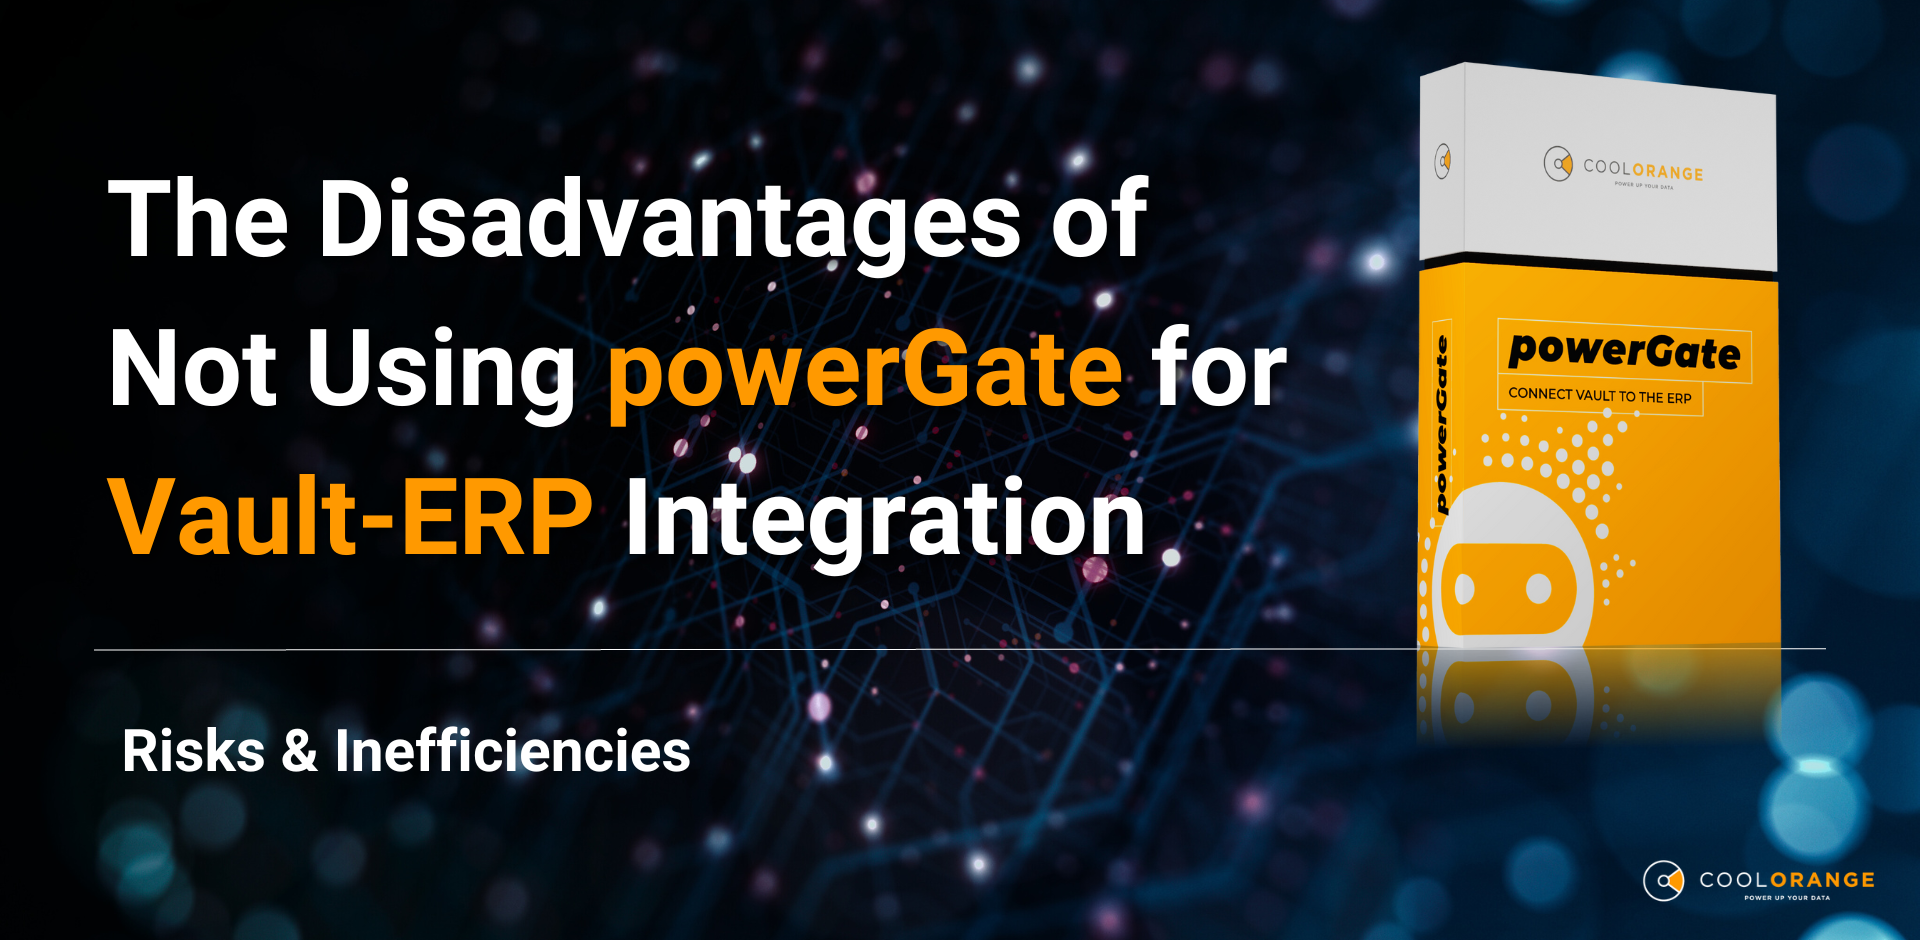 The Disadvantages of Not Using powerGate for Vault-ERP Integration